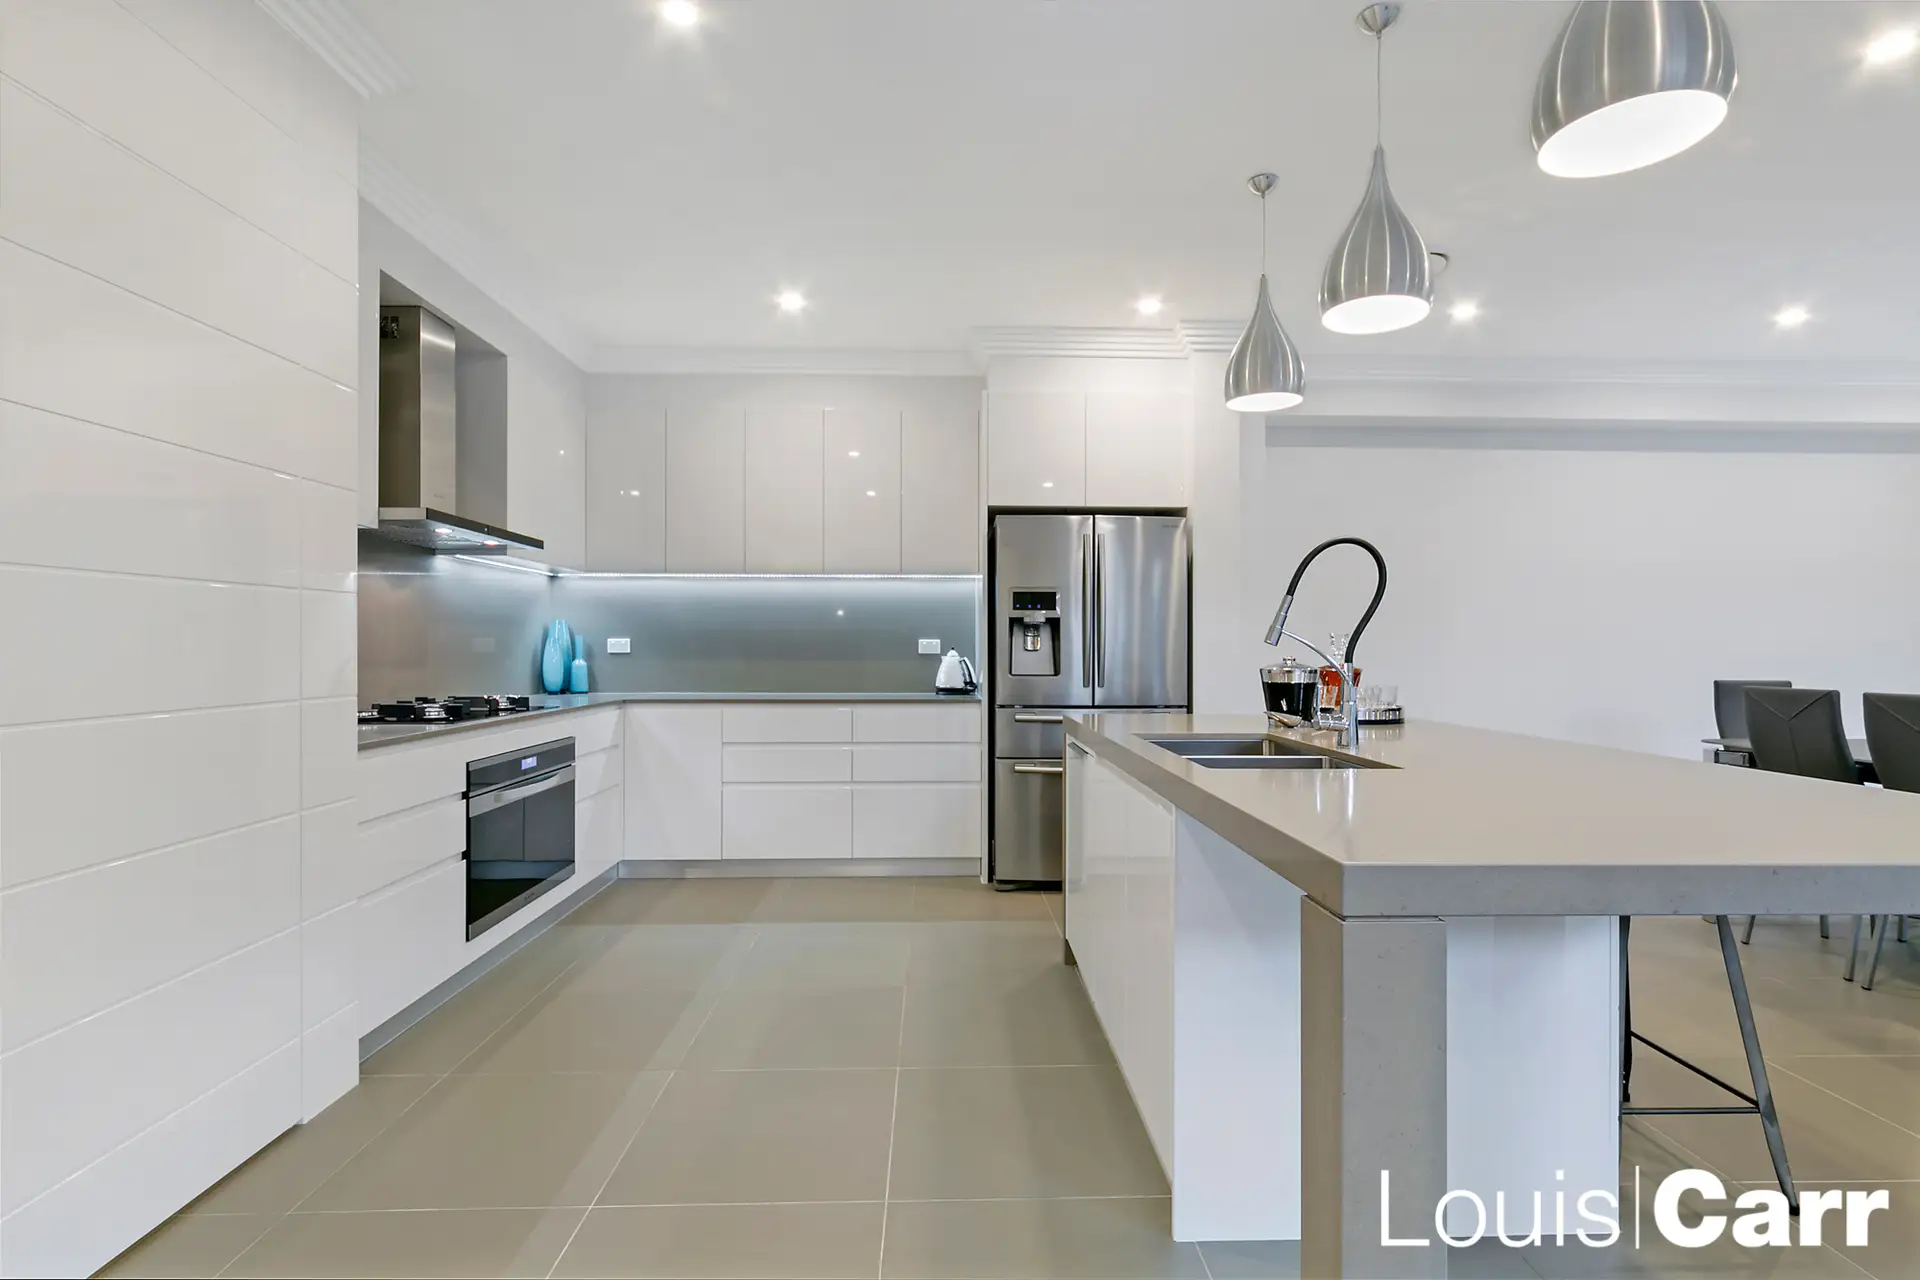 Photo #3: 31 Fairburn Avenue, West Pennant Hills - Sold by Louis Carr Real Estate